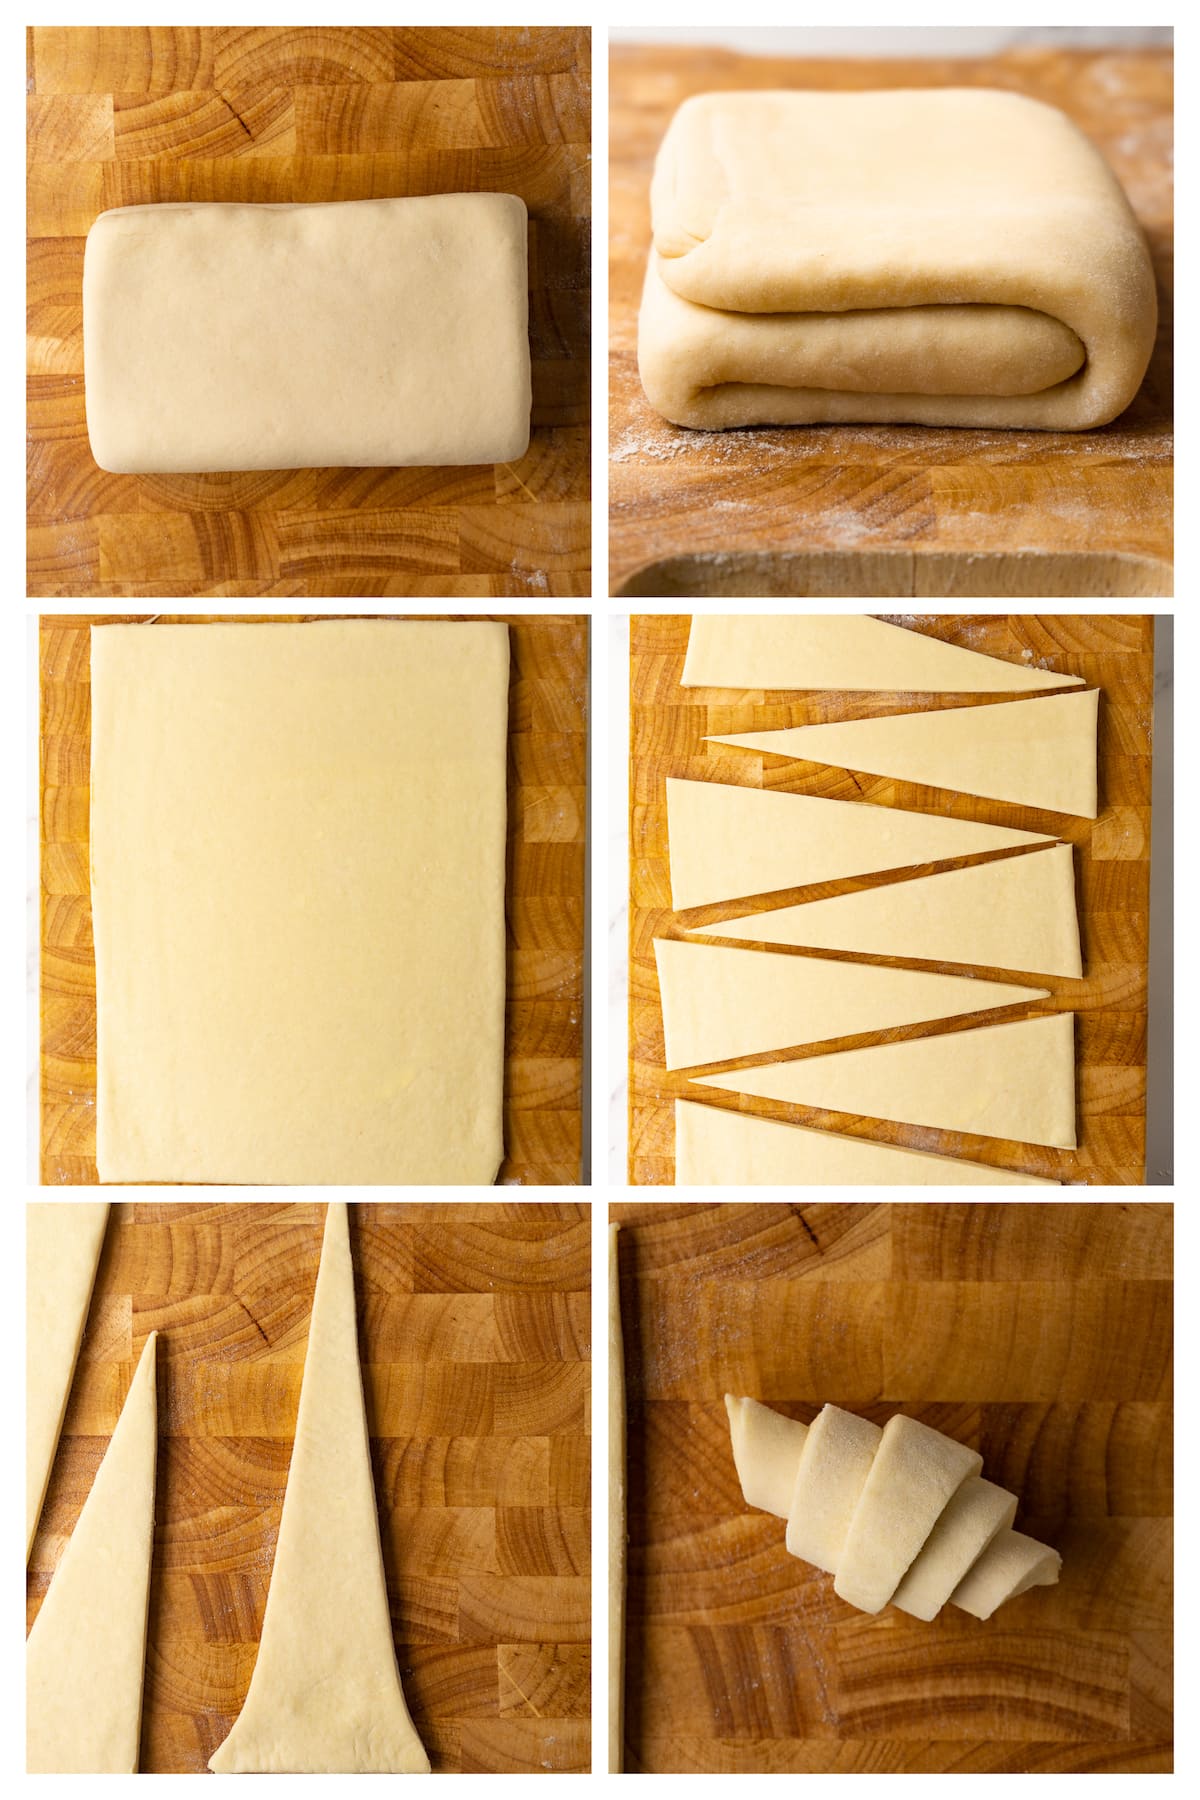 The collage image shows six steps to roll out the dough, cutting out the triangles and shaping future croissants.